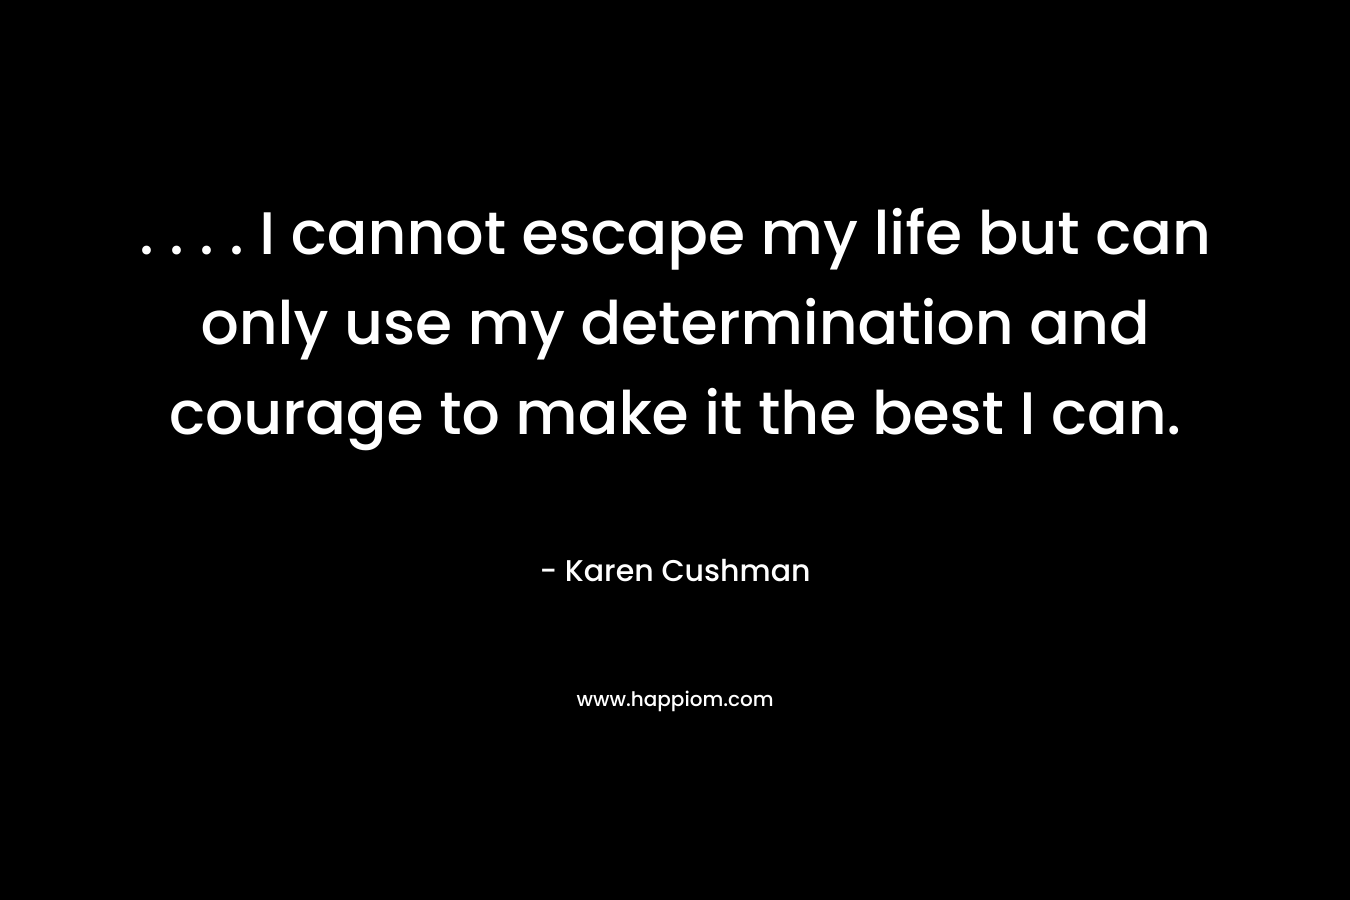 . . . . I cannot escape my life but can only use my determination and courage to make it the best I can.